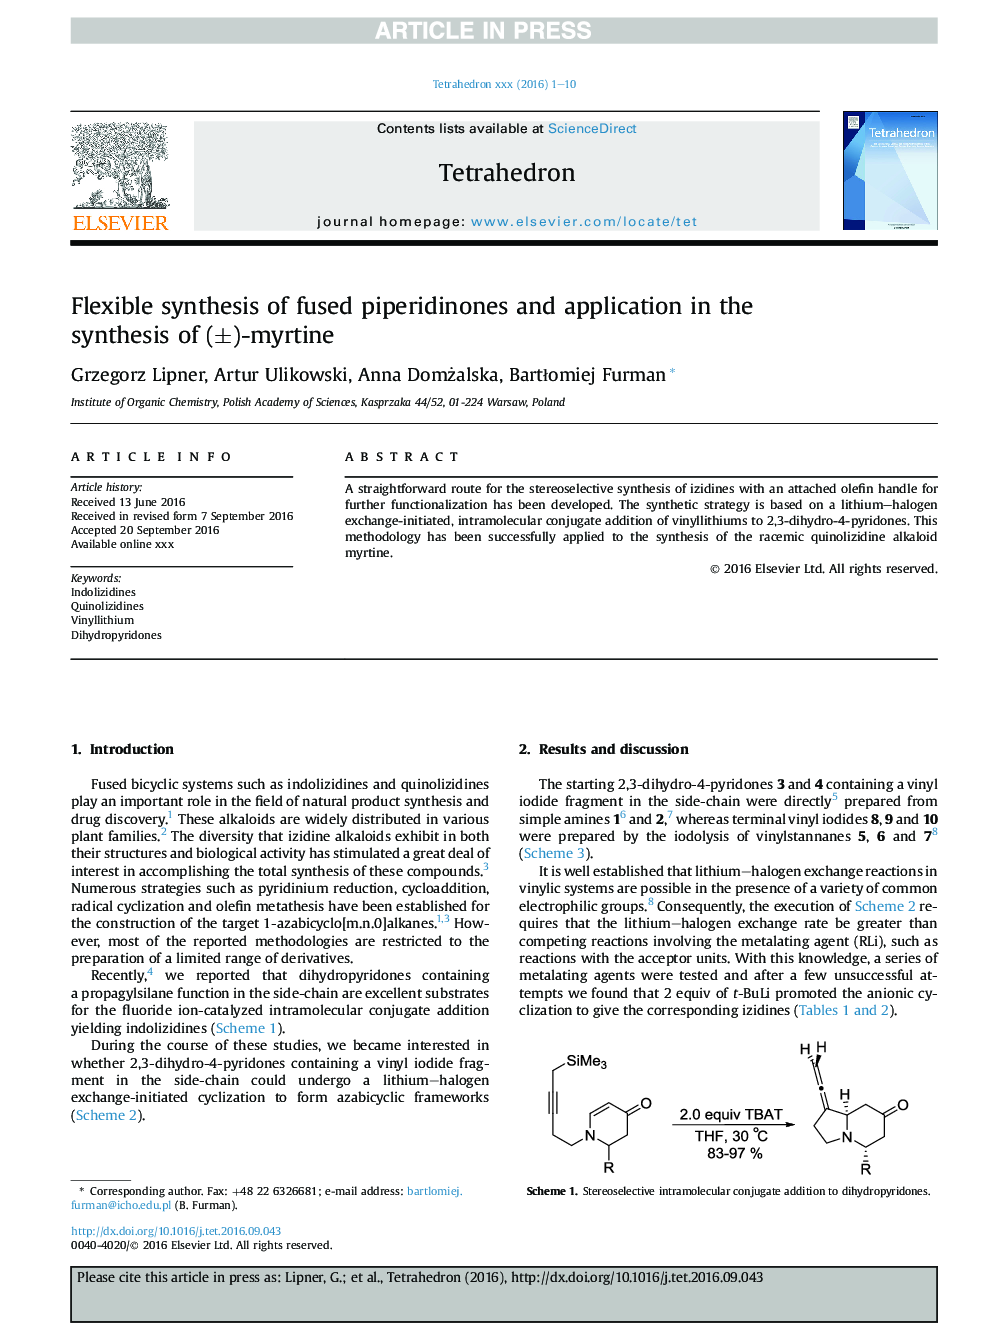 Flexible synthesis of fused piperidinones and application in the synthesis of (Â±)-myrtine